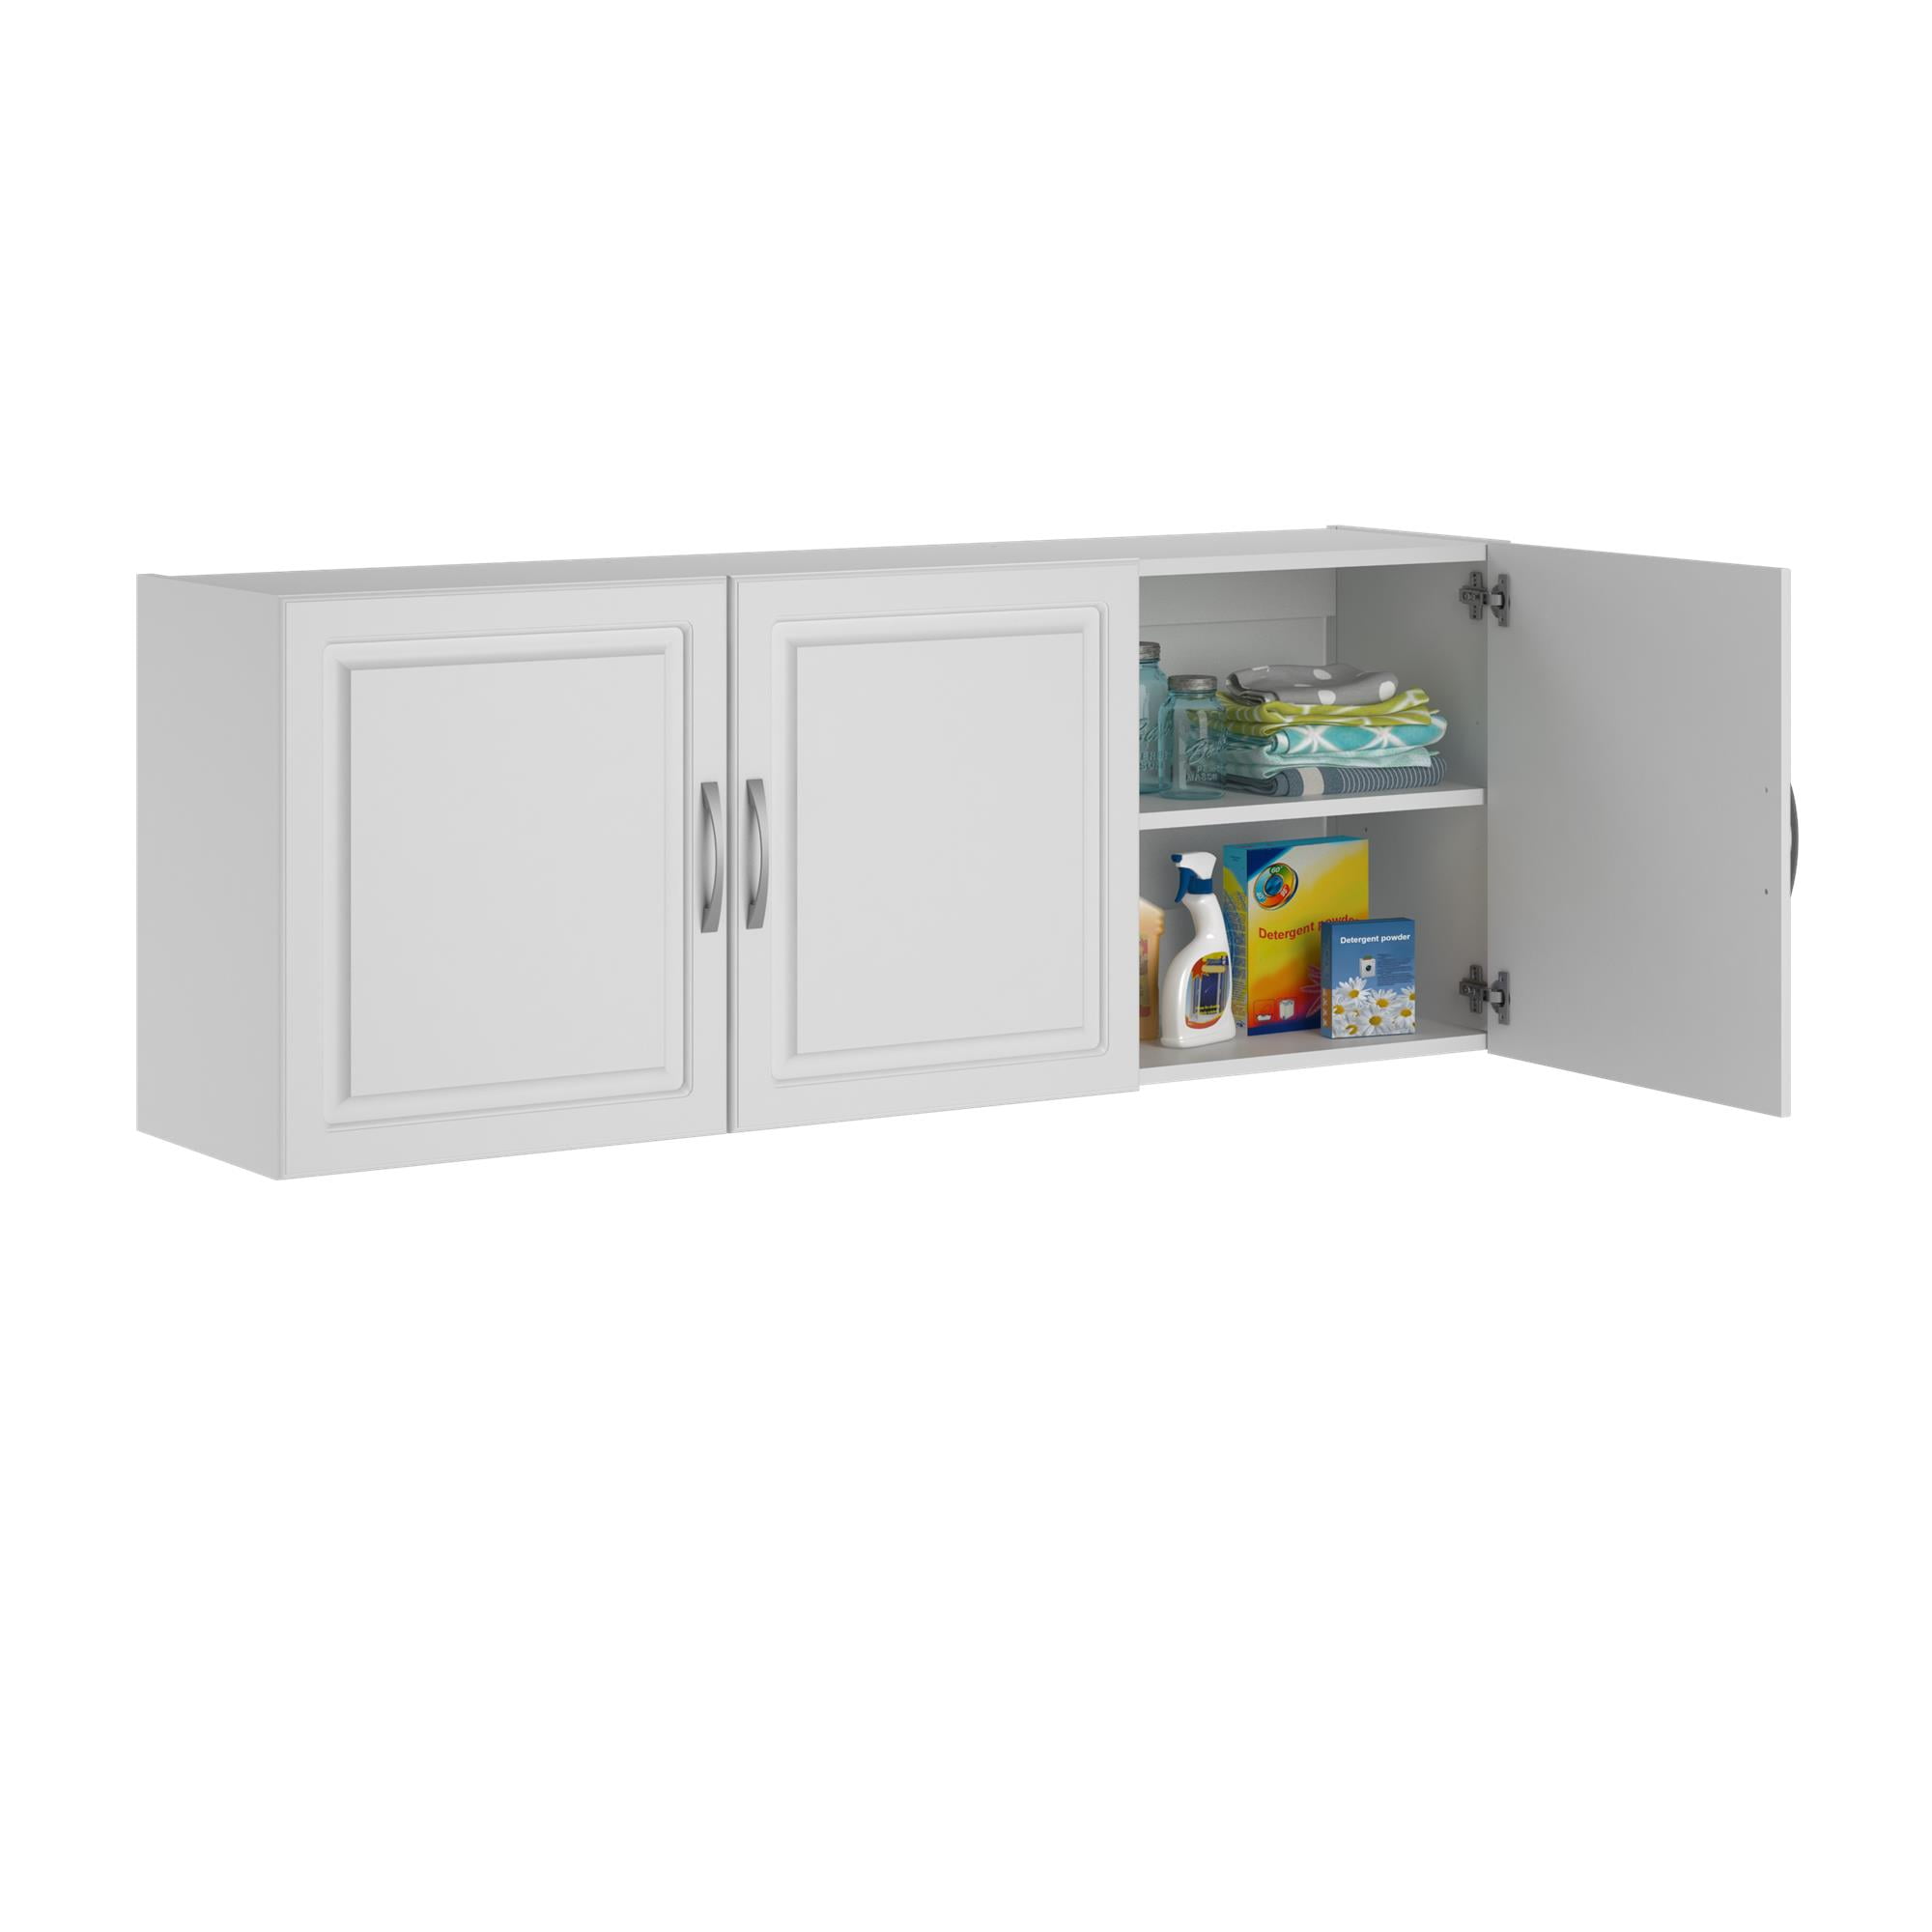 Espresso Covert Cabinets Sliding wall mounted Cabinet Shelf LOCKS & CONCEALS 